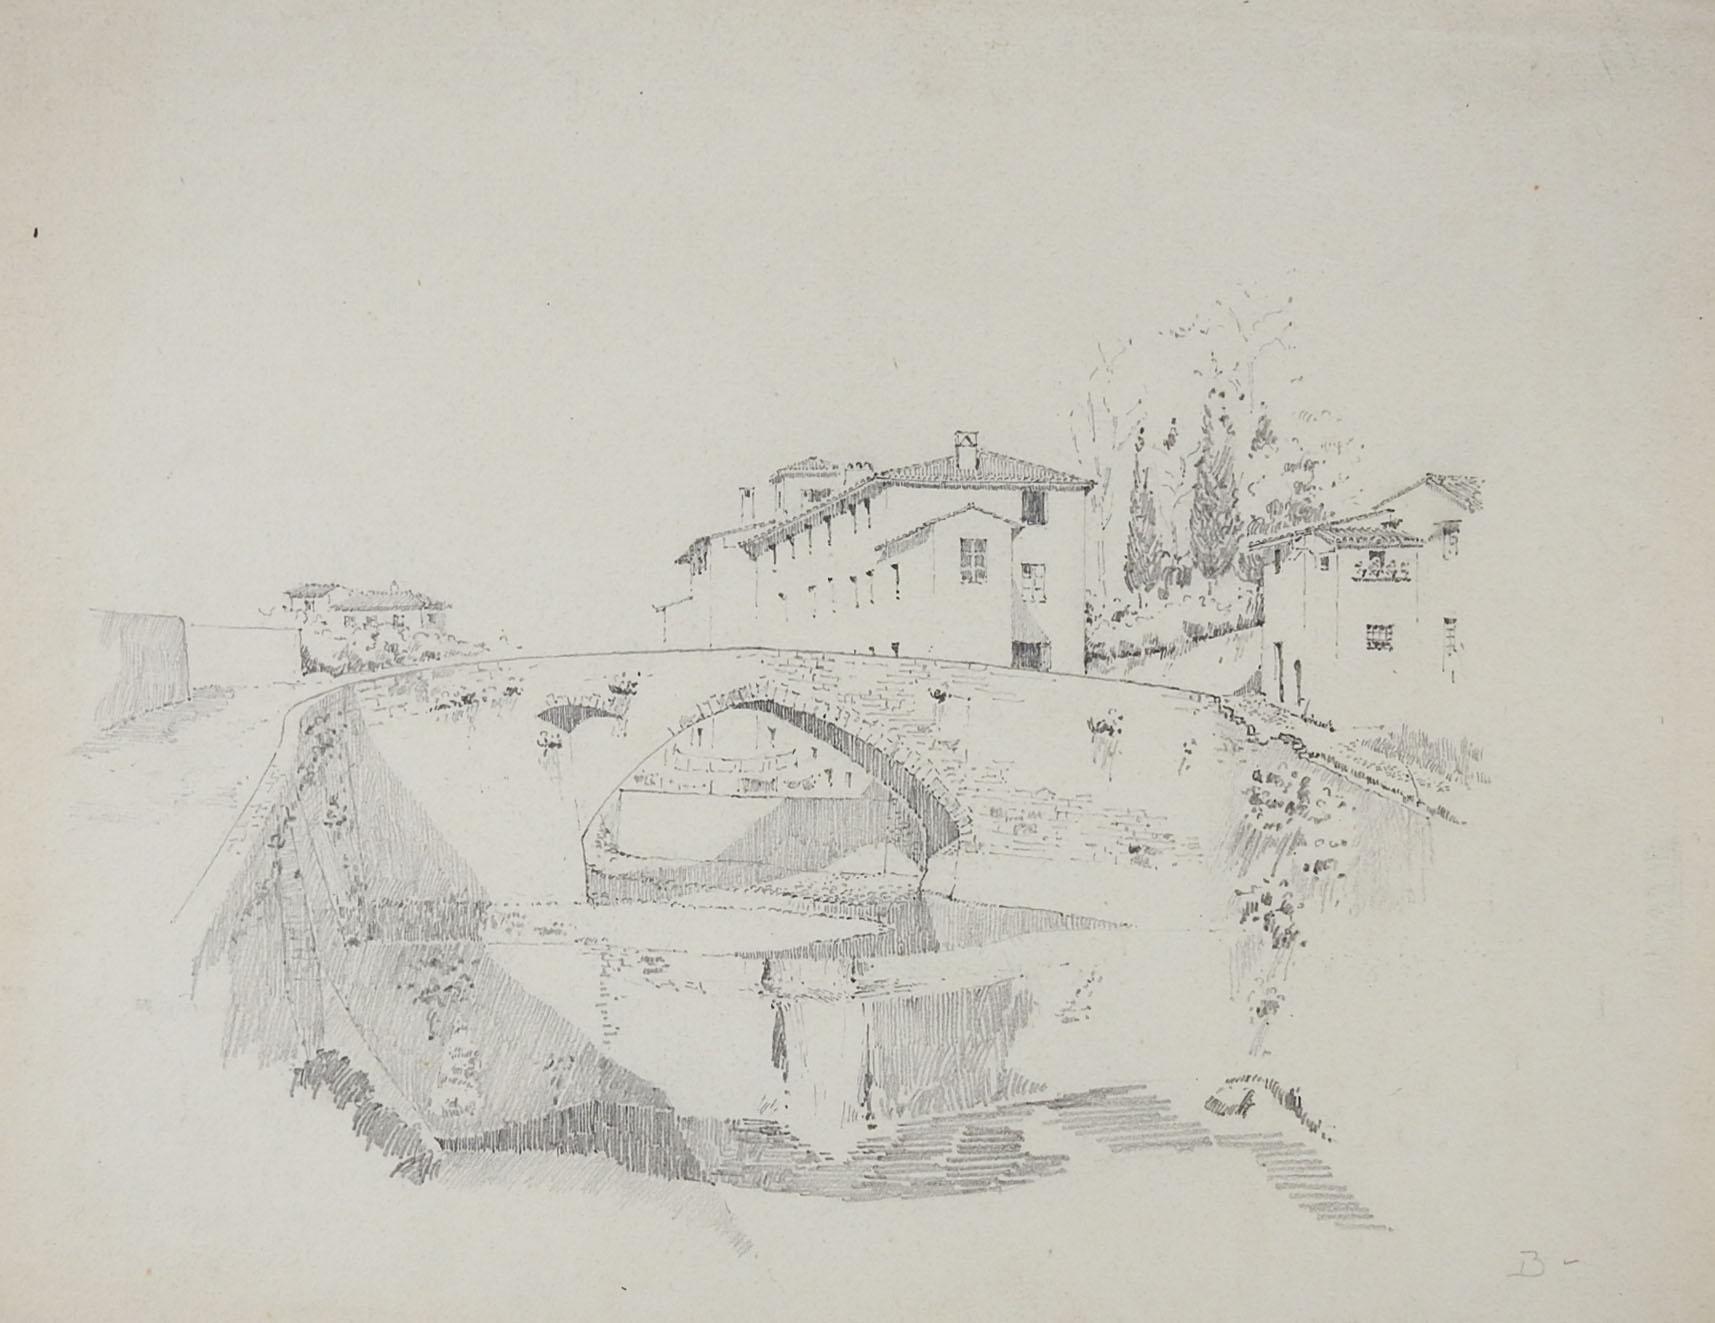 Antique circa 1900 pencil on paper architectural class study drawing of stone bridge and surrounding stucco and tile roofed buildings. Signed R. H. Pearce lower right corner. Unframed, age toning, edge wear.